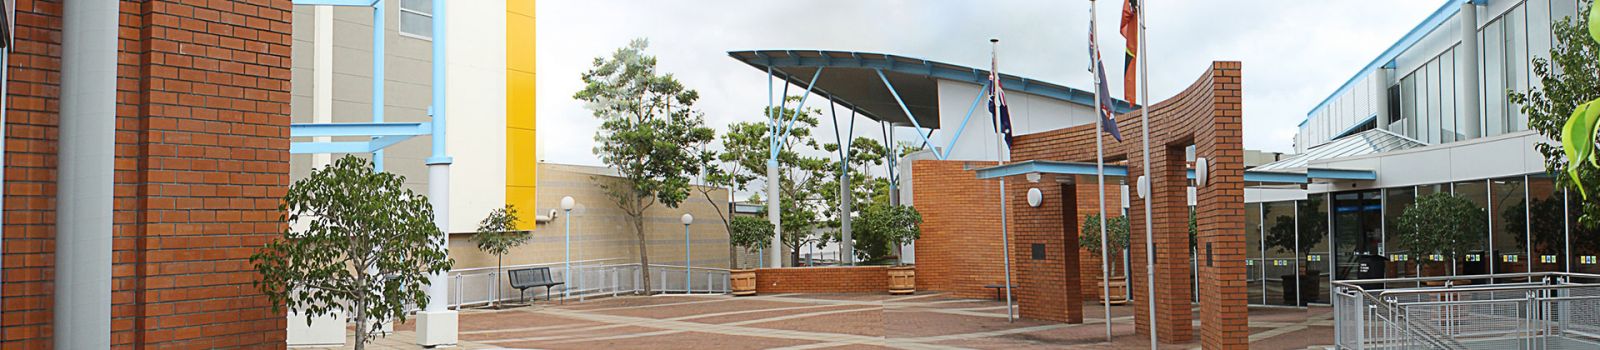 Side angle view of the Council Administration Building. Showing the different angles of the buildings architecture.  banner image